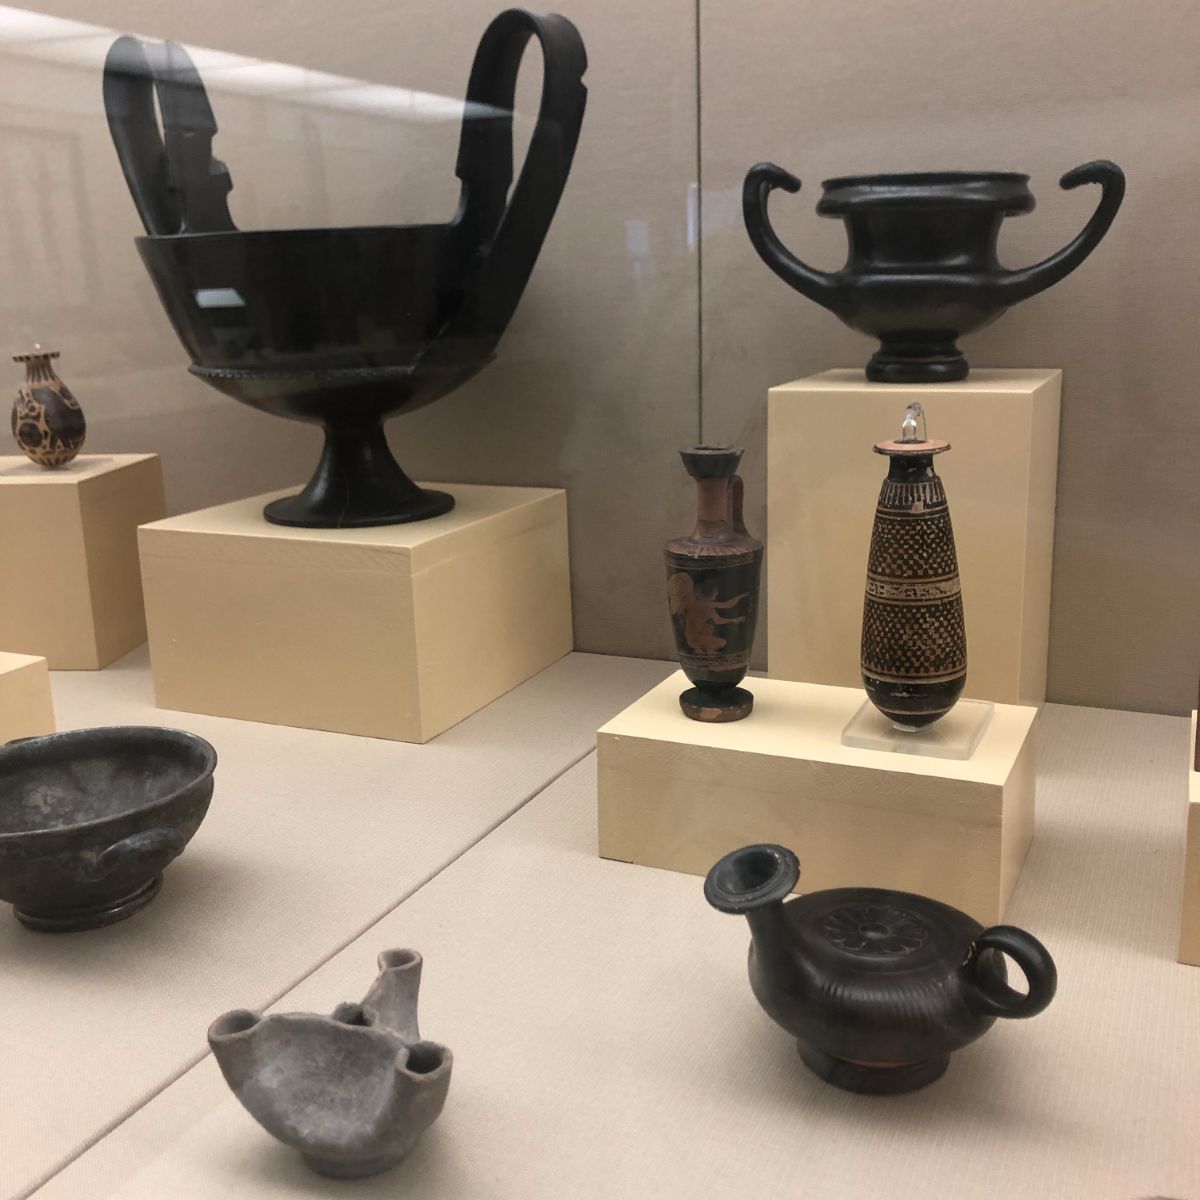 Ancient vessels in the Breverman Collection